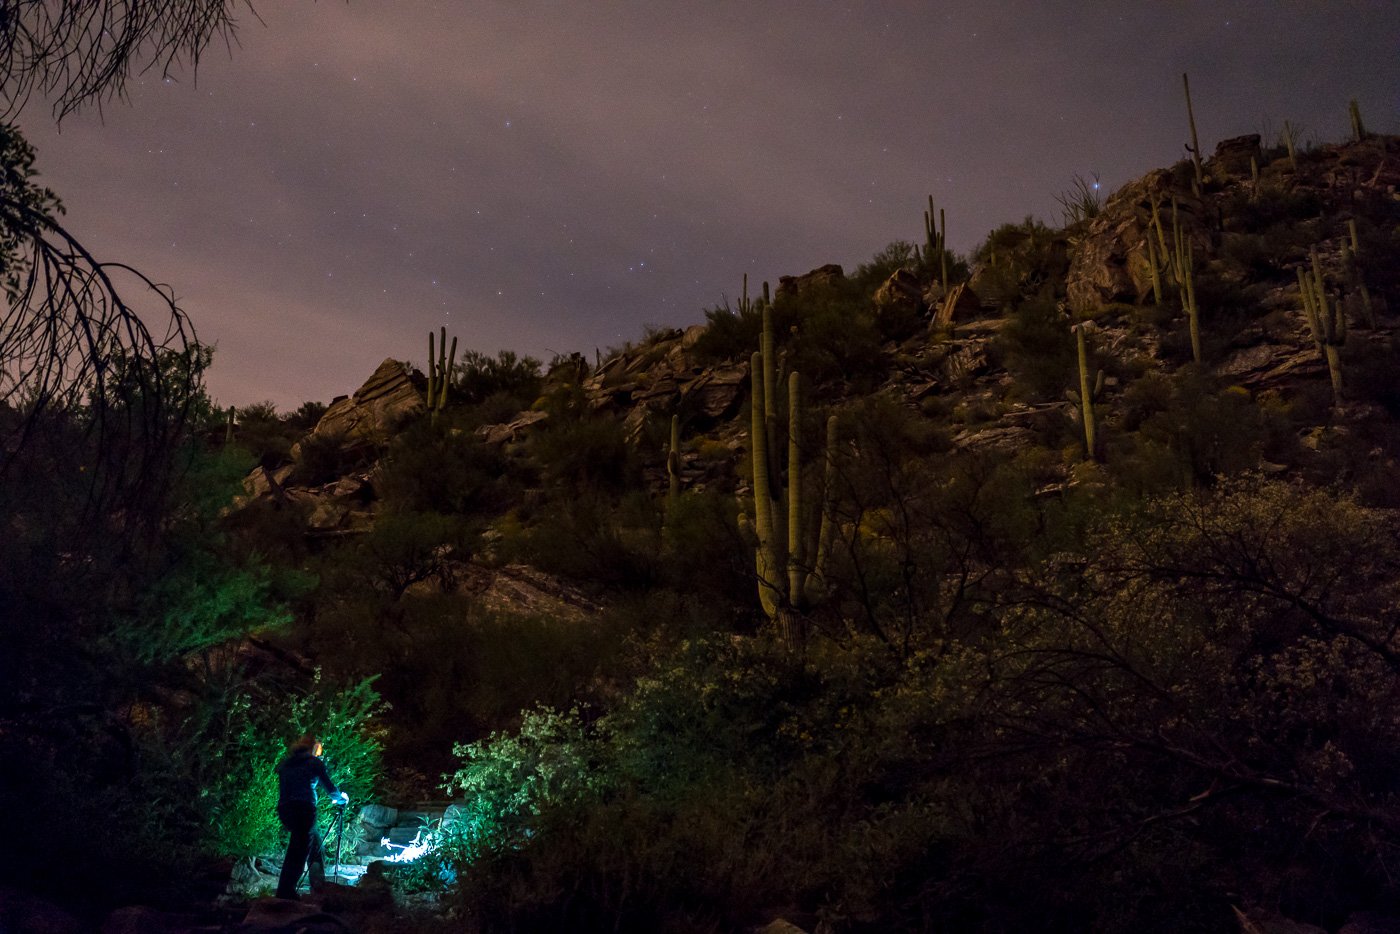 Capturing Images at night in Sabino Canyon. March 2017.